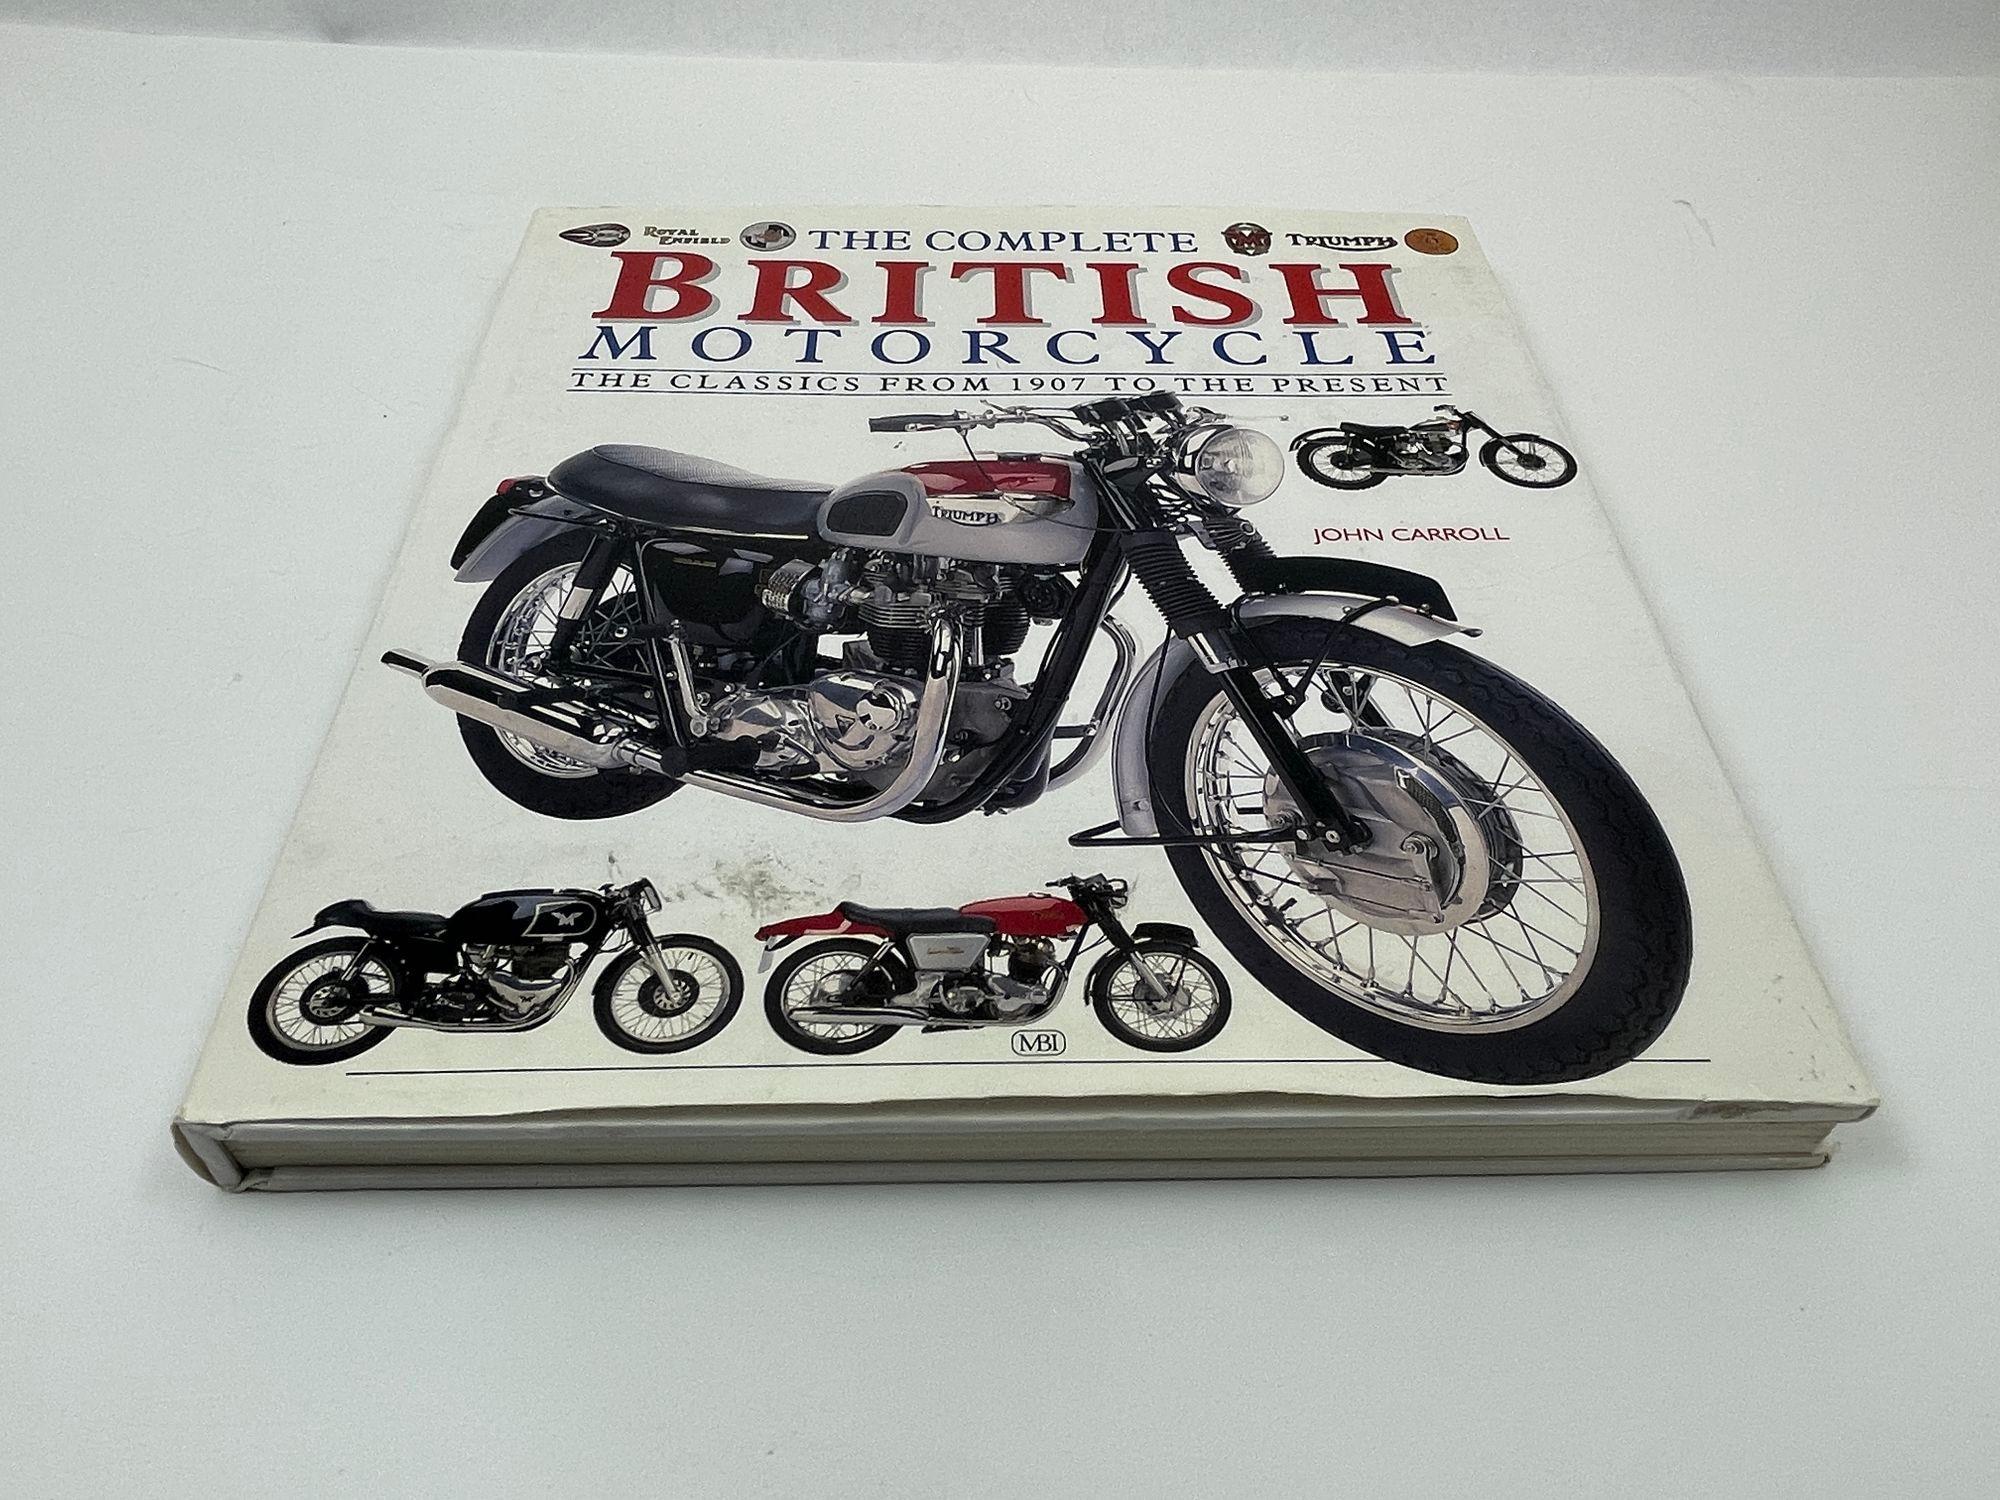 The Complete British Motorcycle The Classics From 1907 To The Present by J Carroll.Hardcover with dust jacket. Profusely illustrated throughout.British motorcycles attract a fanatical following because of their worldwide renown. This volume